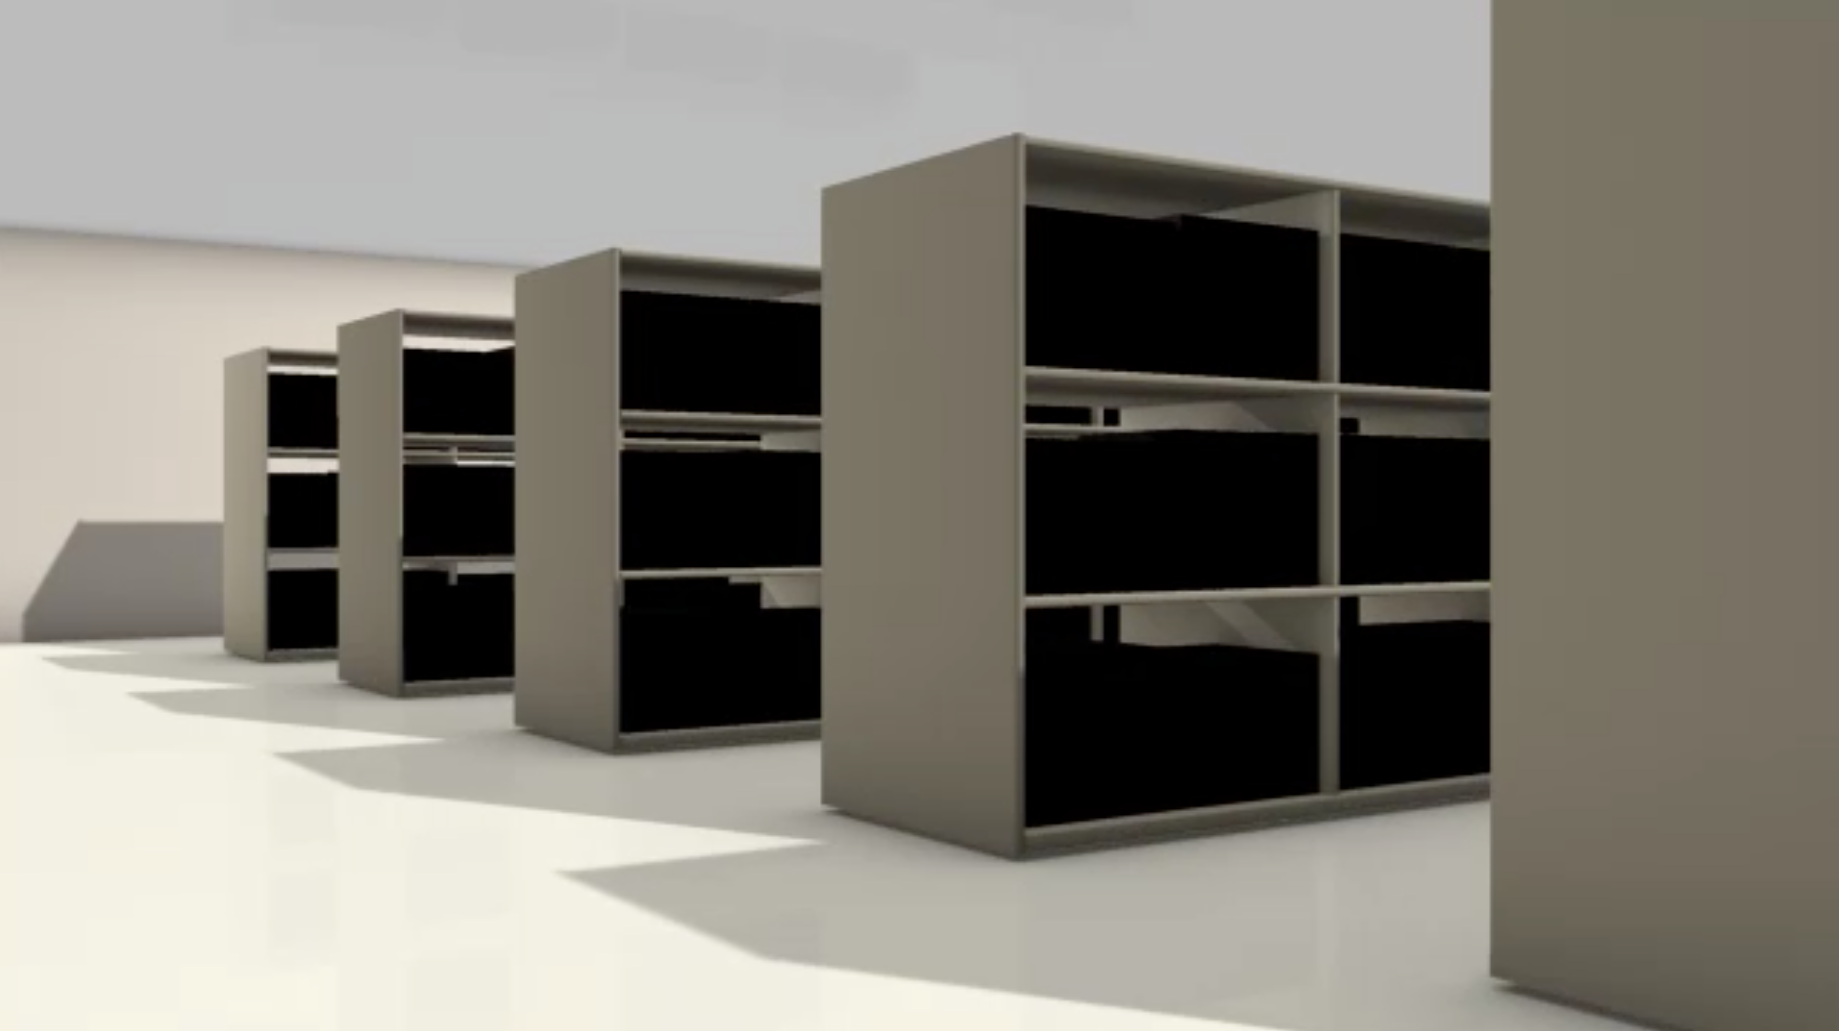 30d High-Density Mobile Wire Shelving - Single Wide